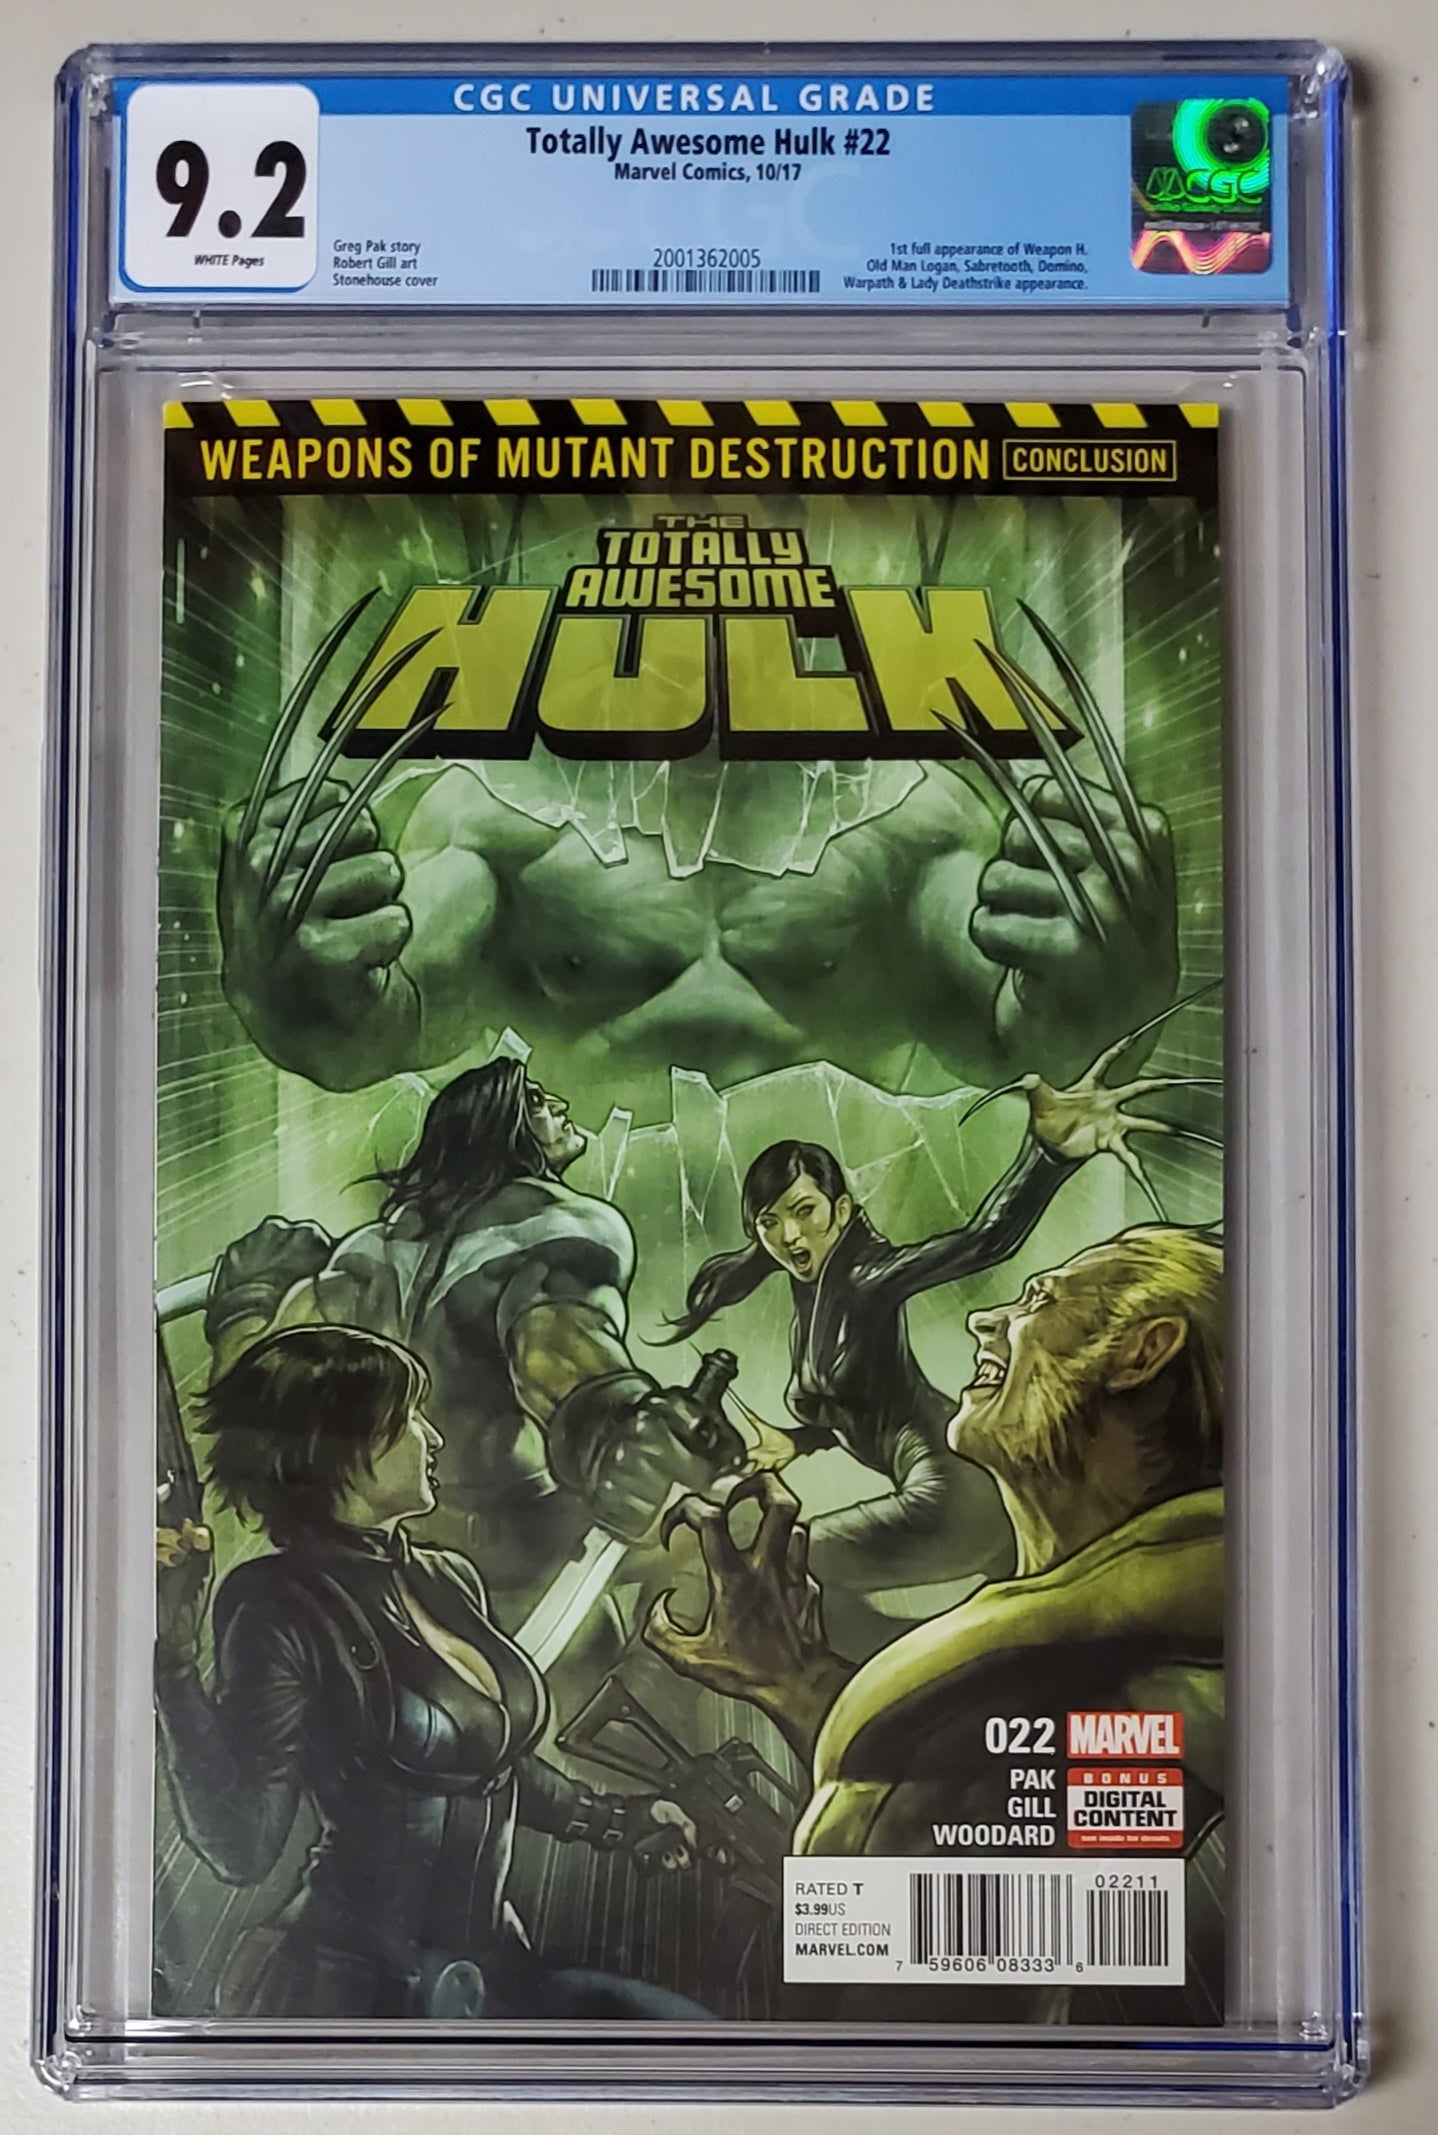 9.2 CGC Totally Awesome Hulk #22 1st Print (1st App Weapon H) 2017 [2001362005]